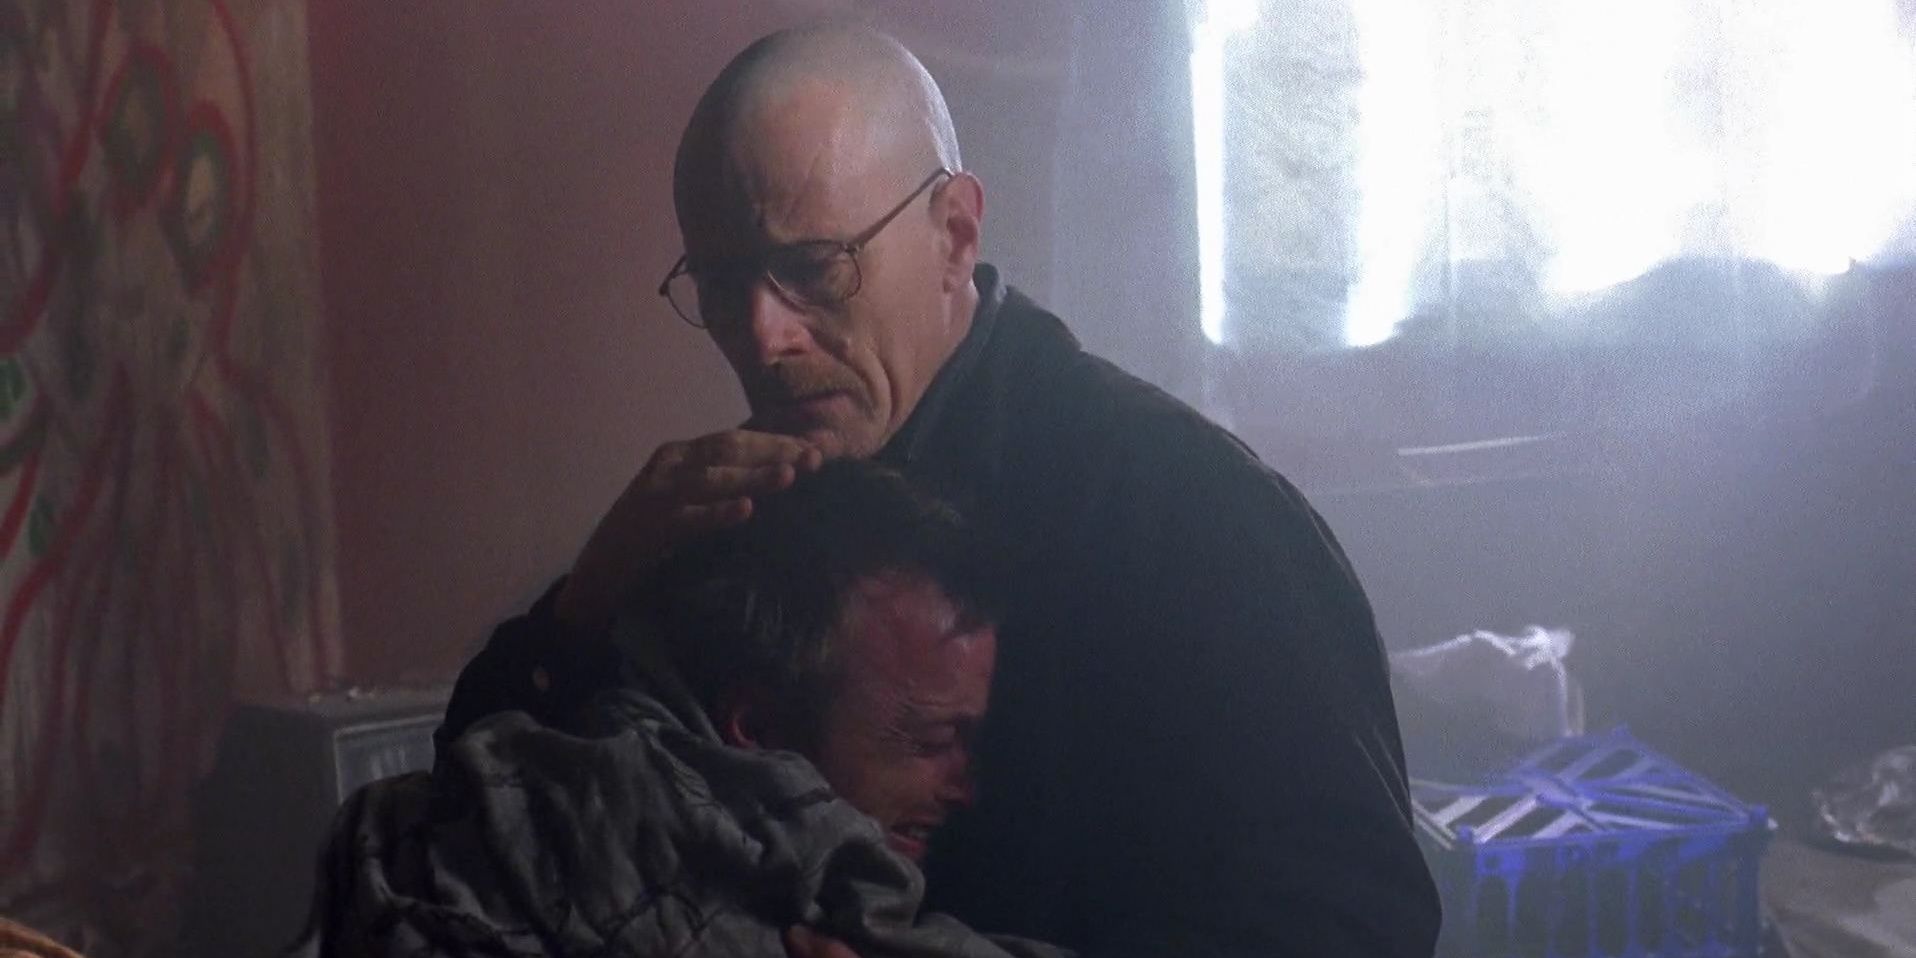 Walter holding and comforting Jesse